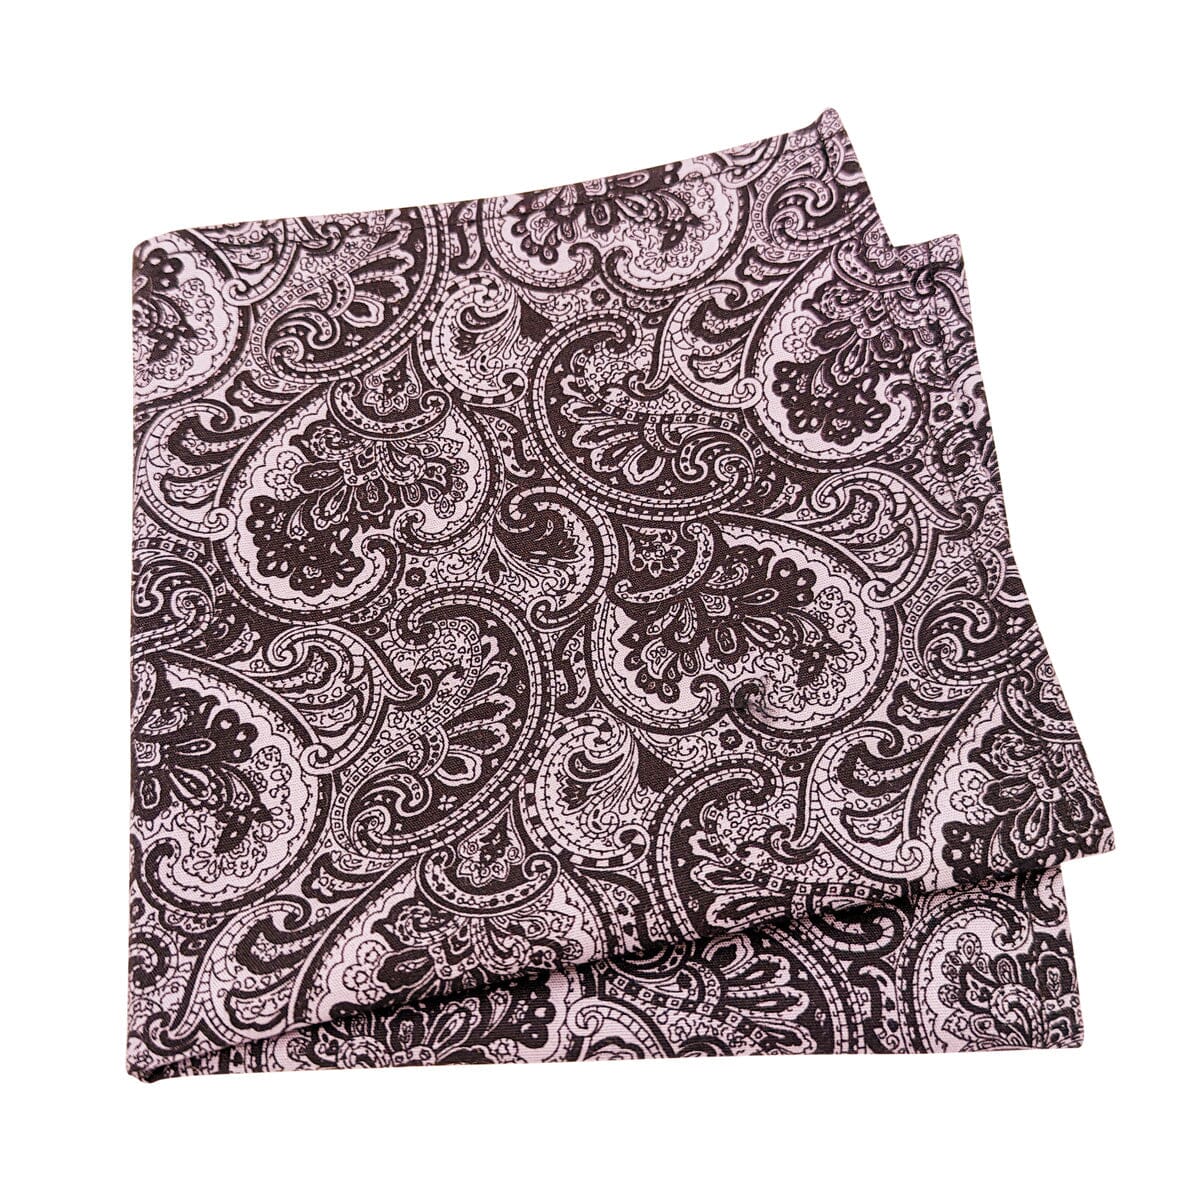 Charcoal Floral Paisley Pocket Square - Handkerchiefs - - THREADPEPPER